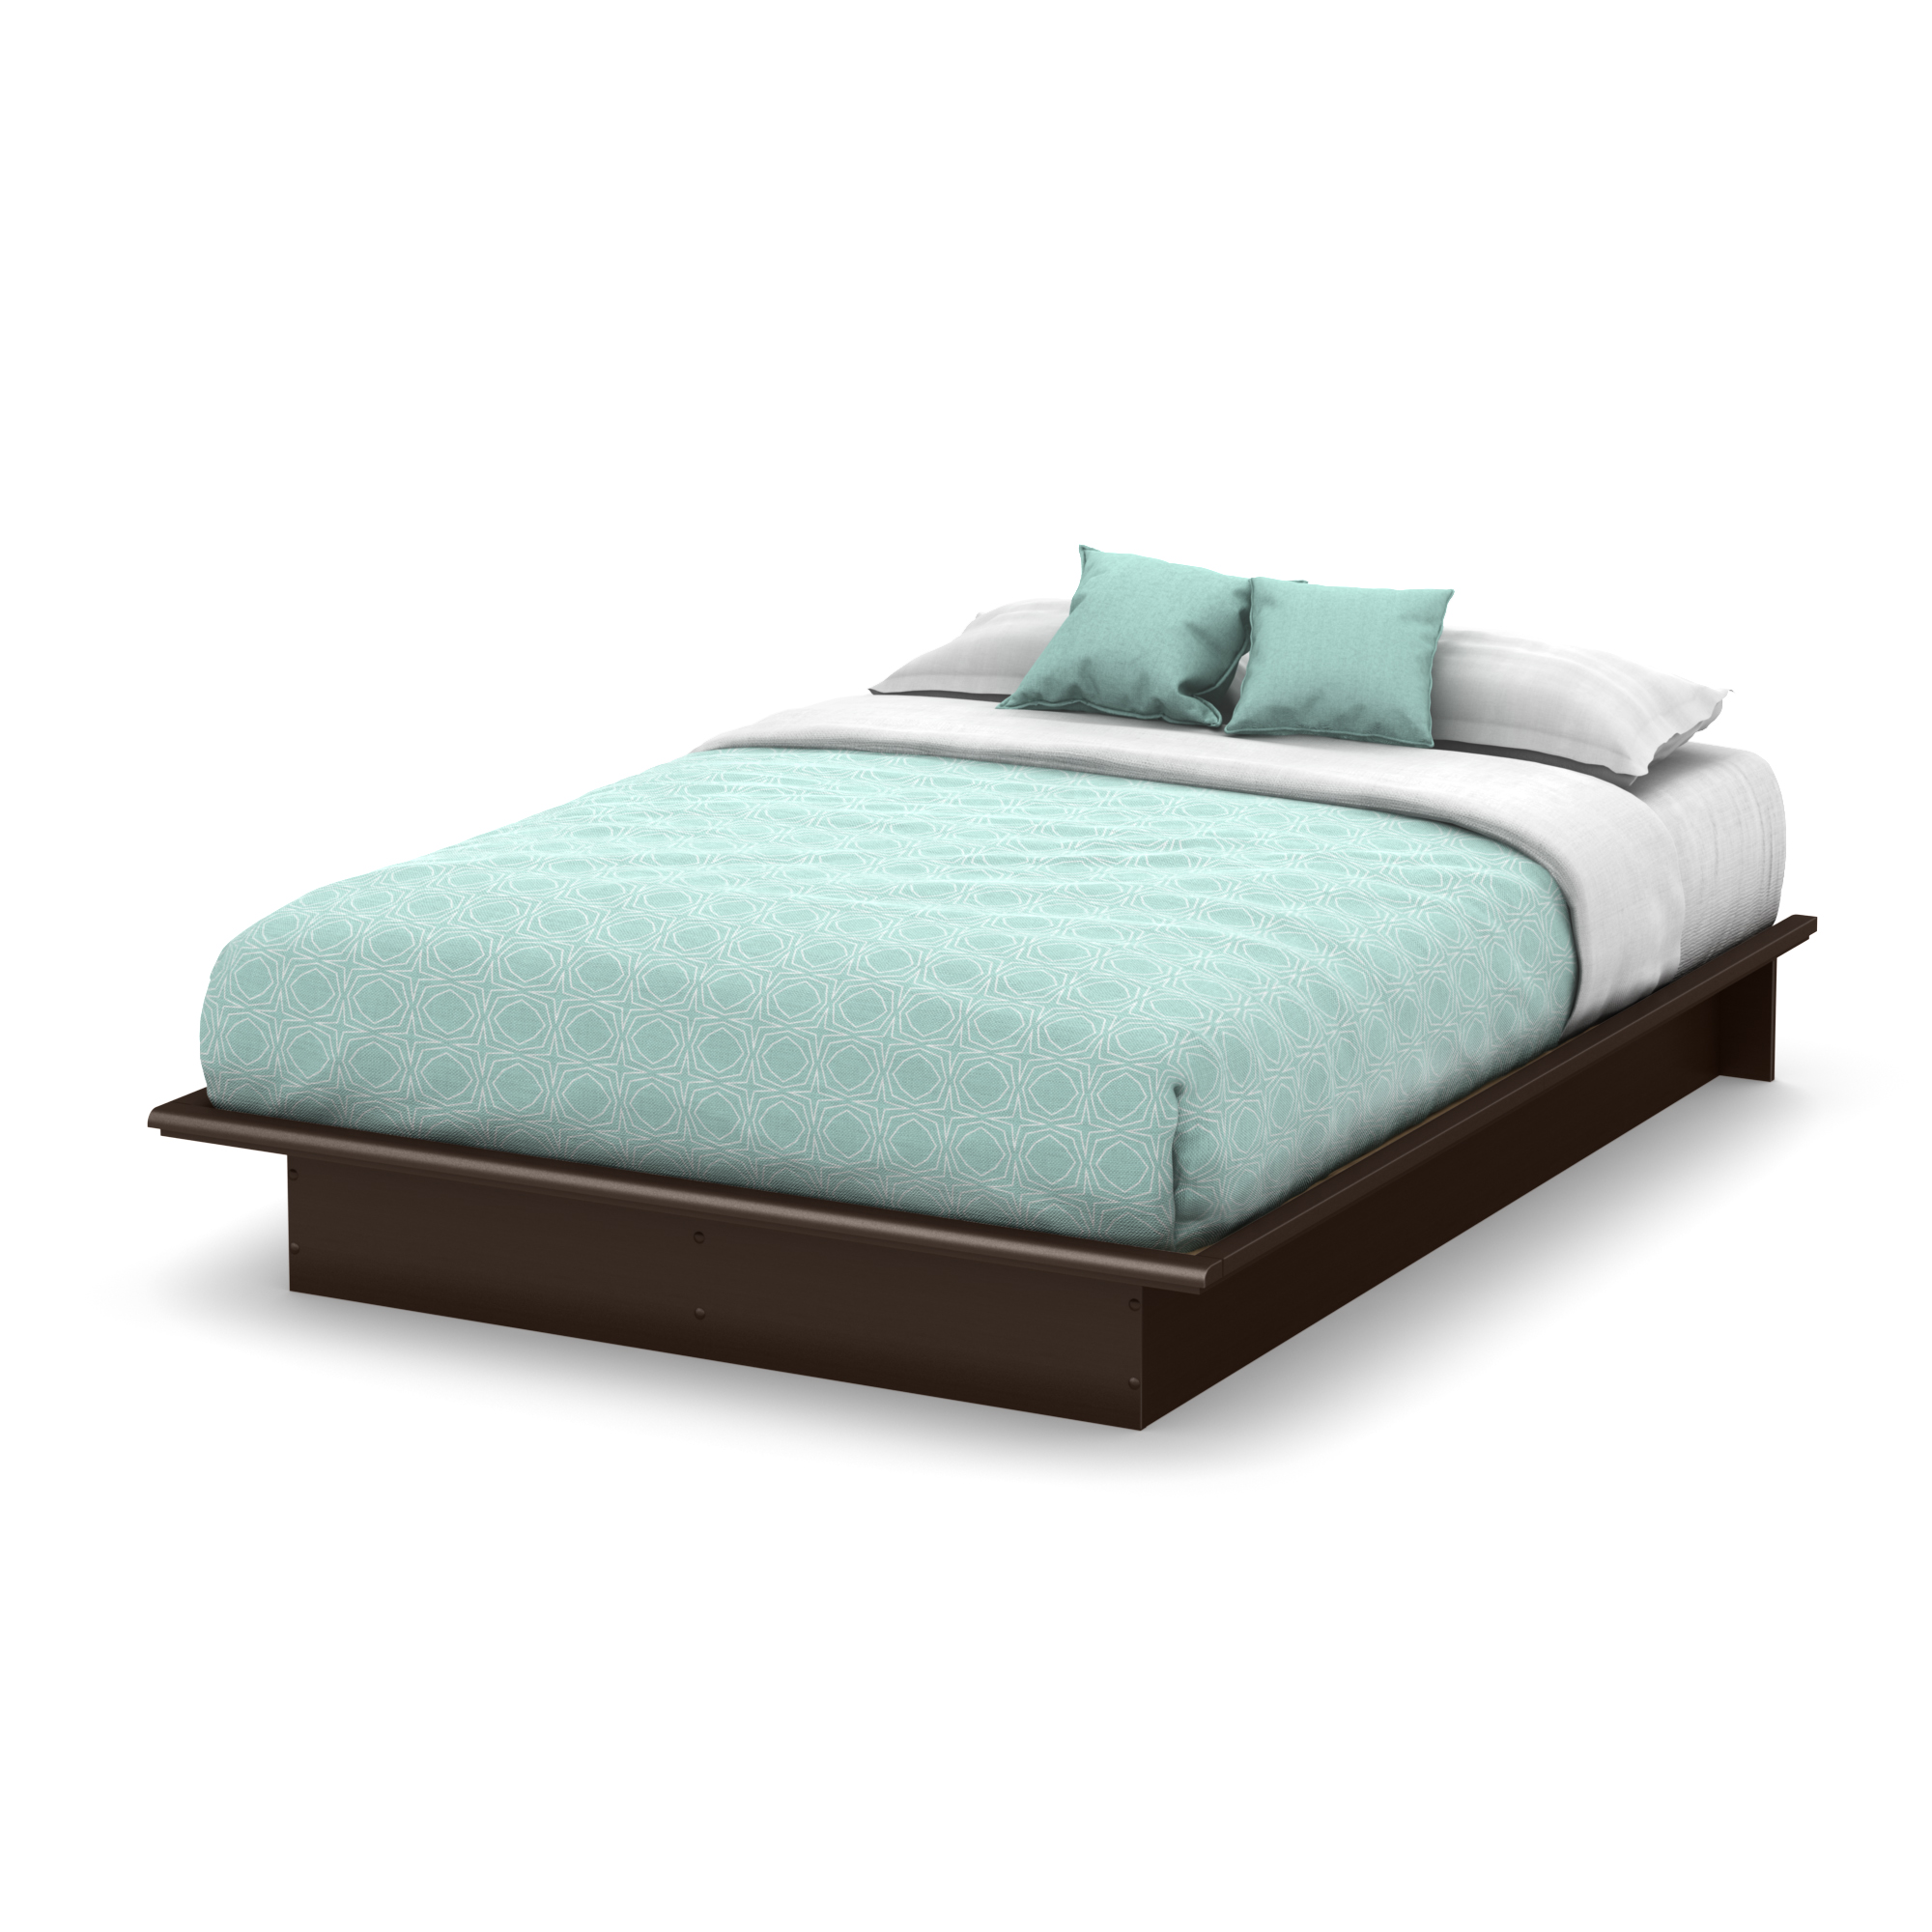 South Shore Basics Queen Platform Bed with Molding, 60'', Multiple Finishes - image 1 of 6